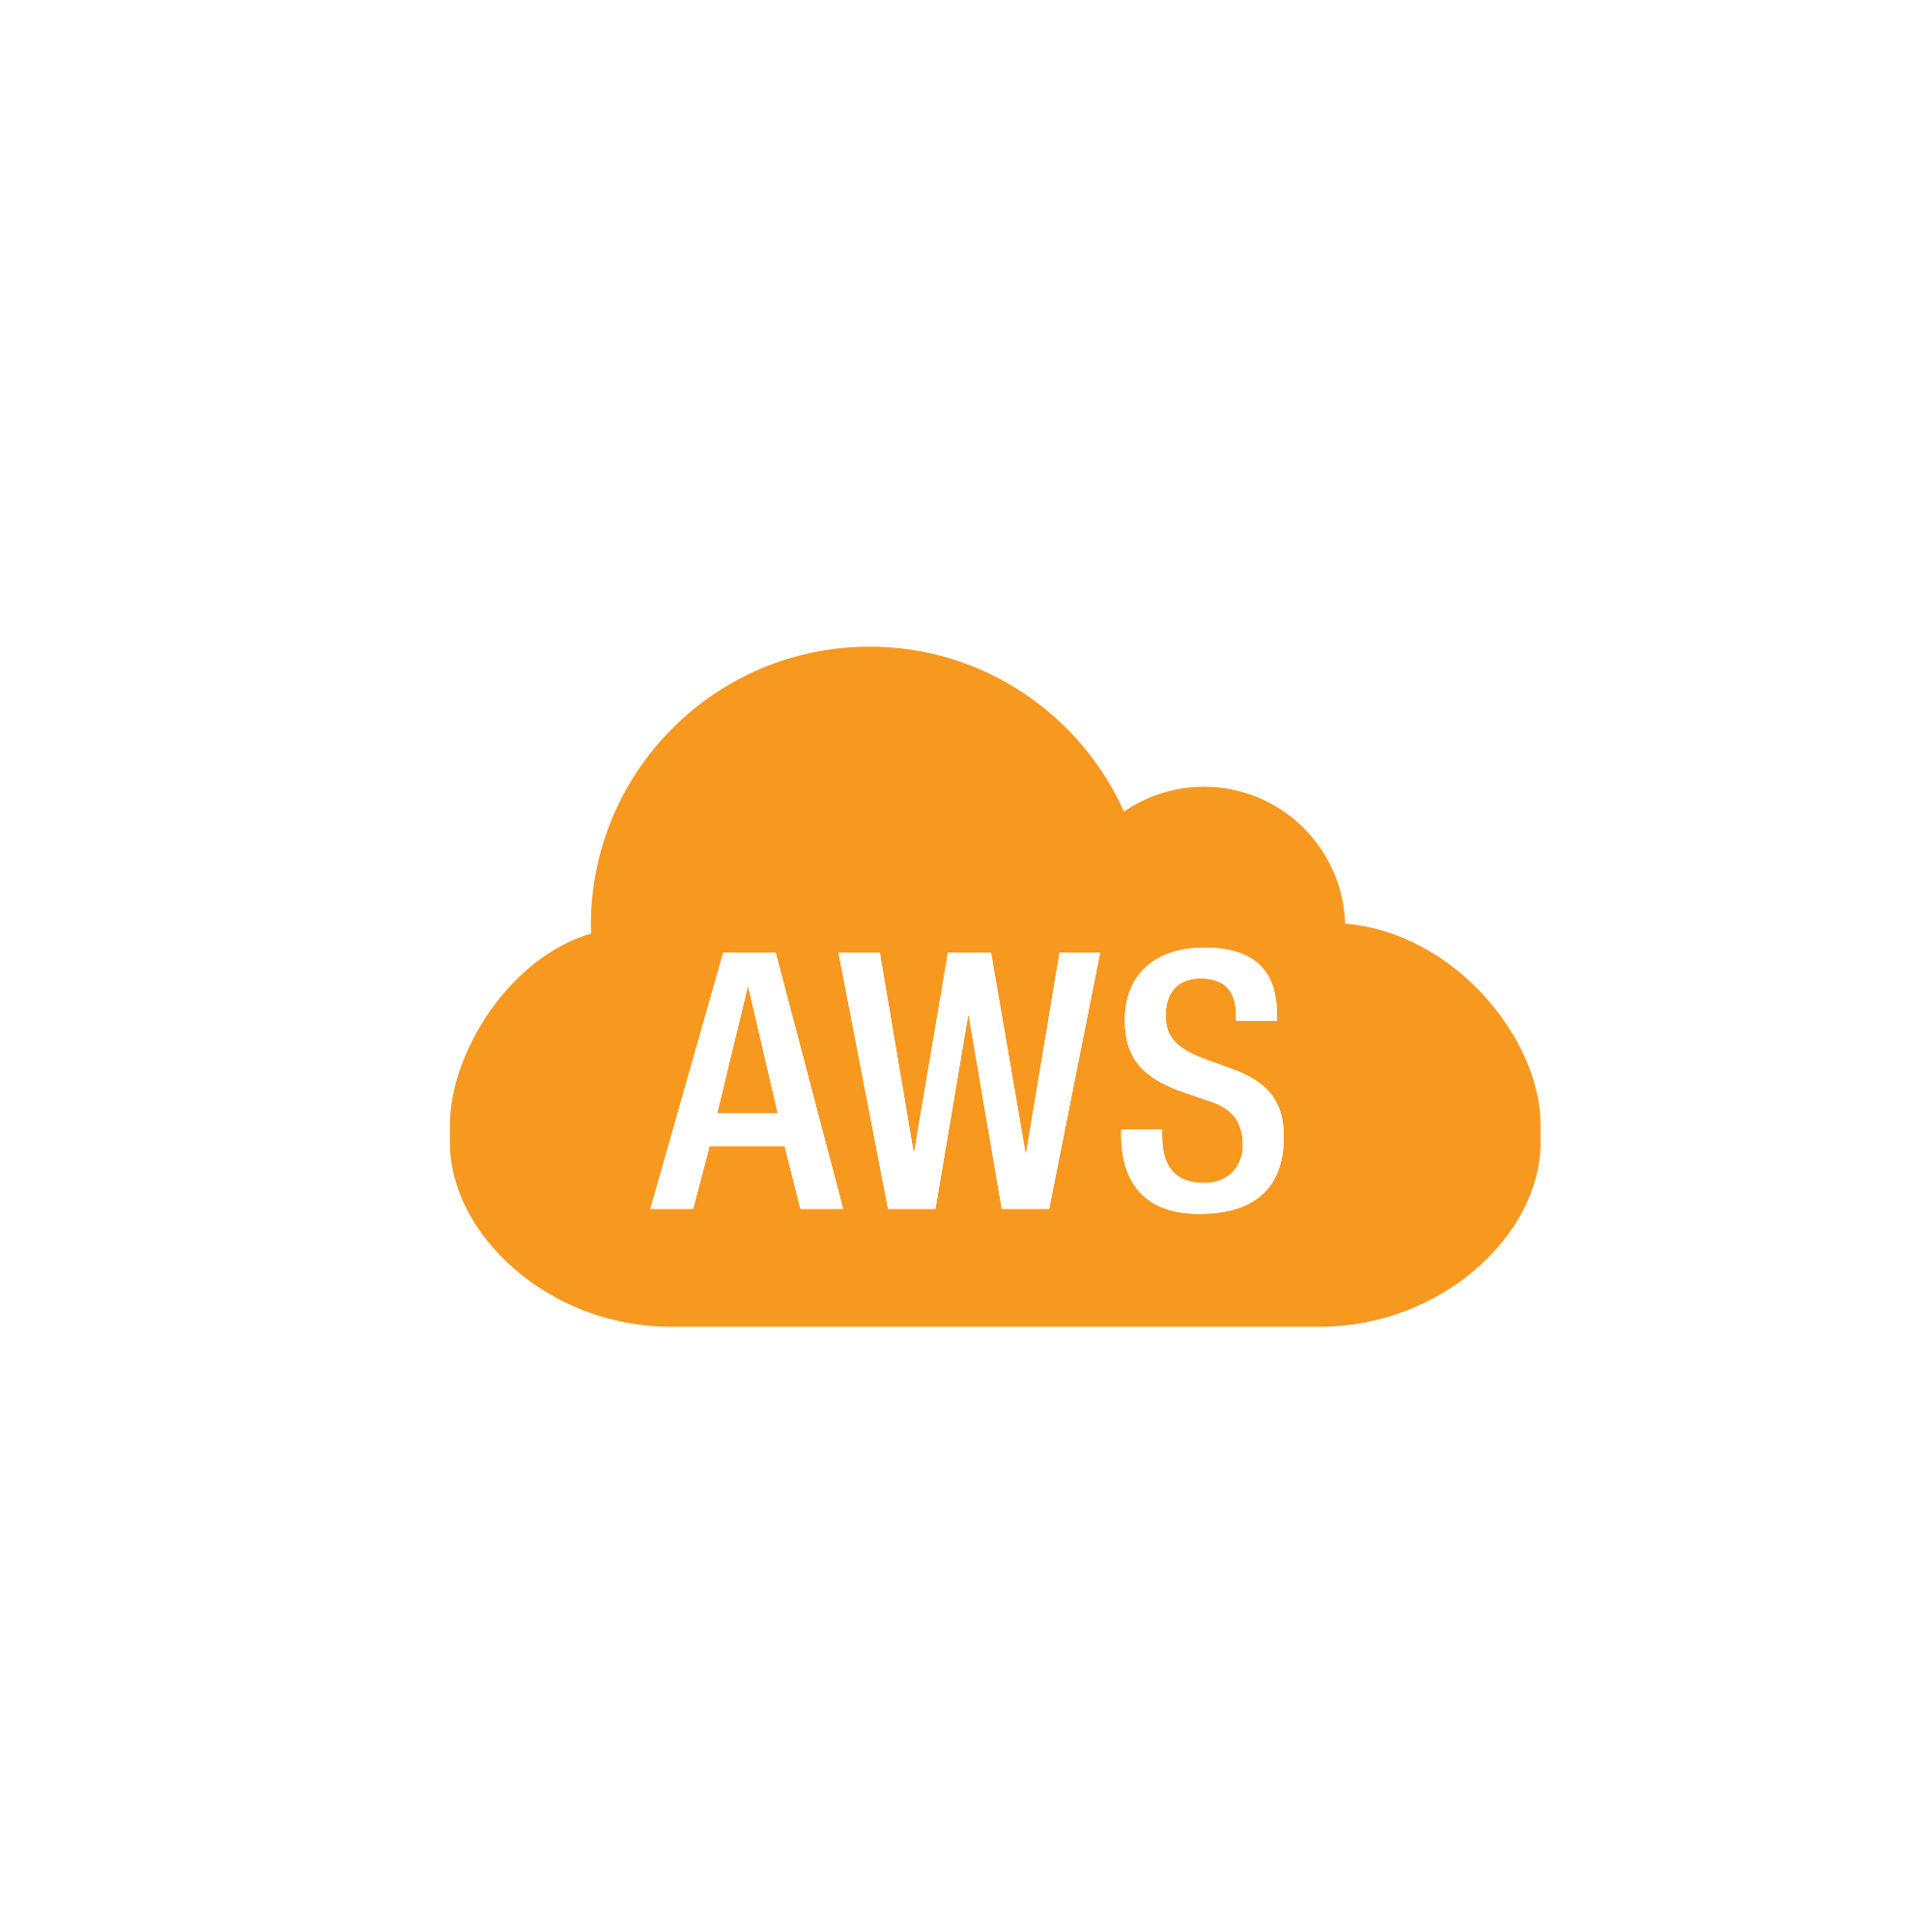 Amazon Web Services AWS Logo Background PNG Image | PNG Play